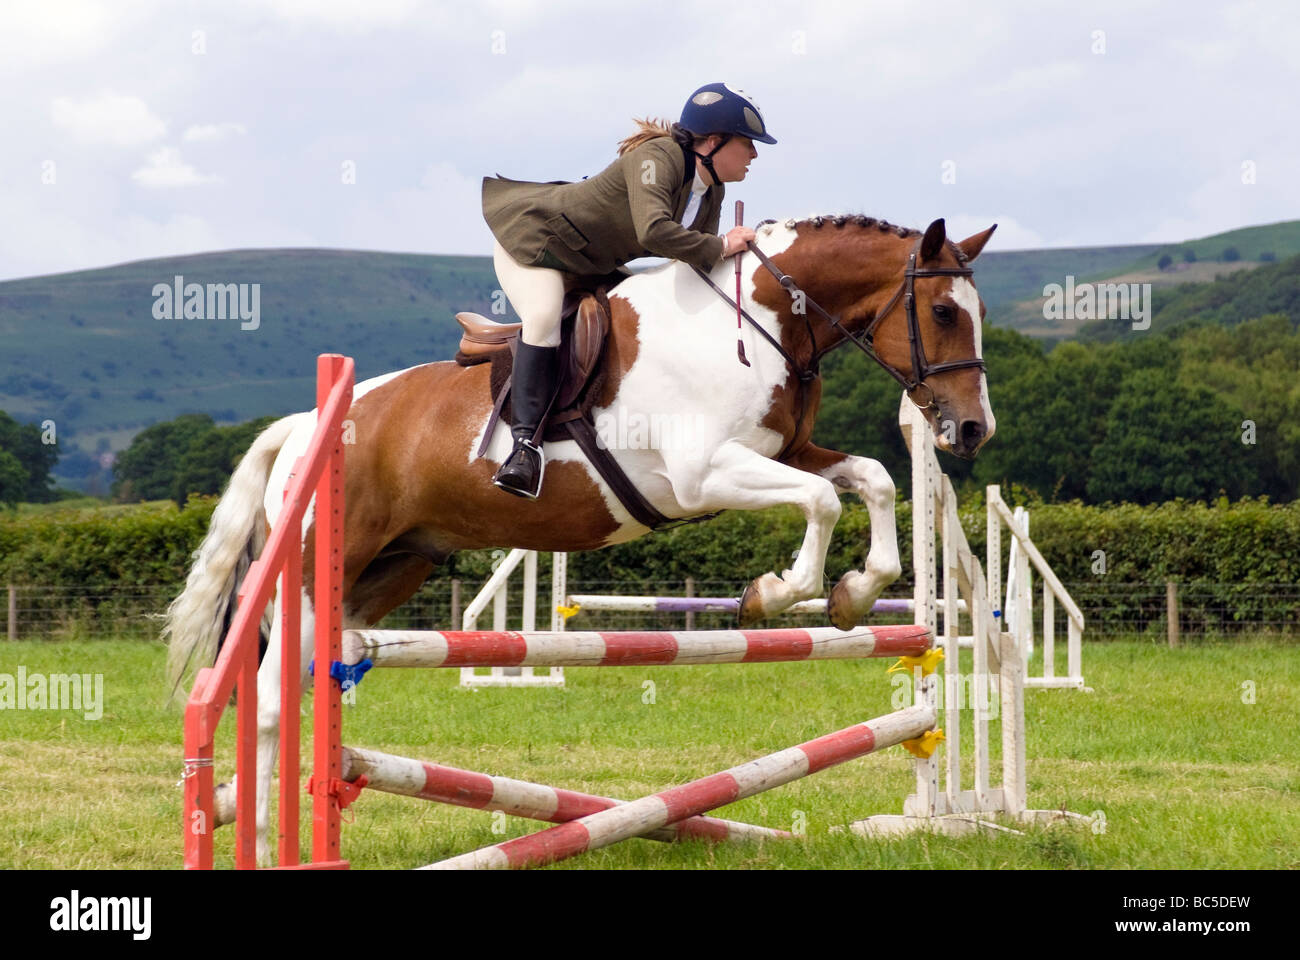 Woman rider in a show jumping competition at Pandy Show, nr Abergavenny, Wales, UK. Brown & white horse jumps a fence. Stock Photo